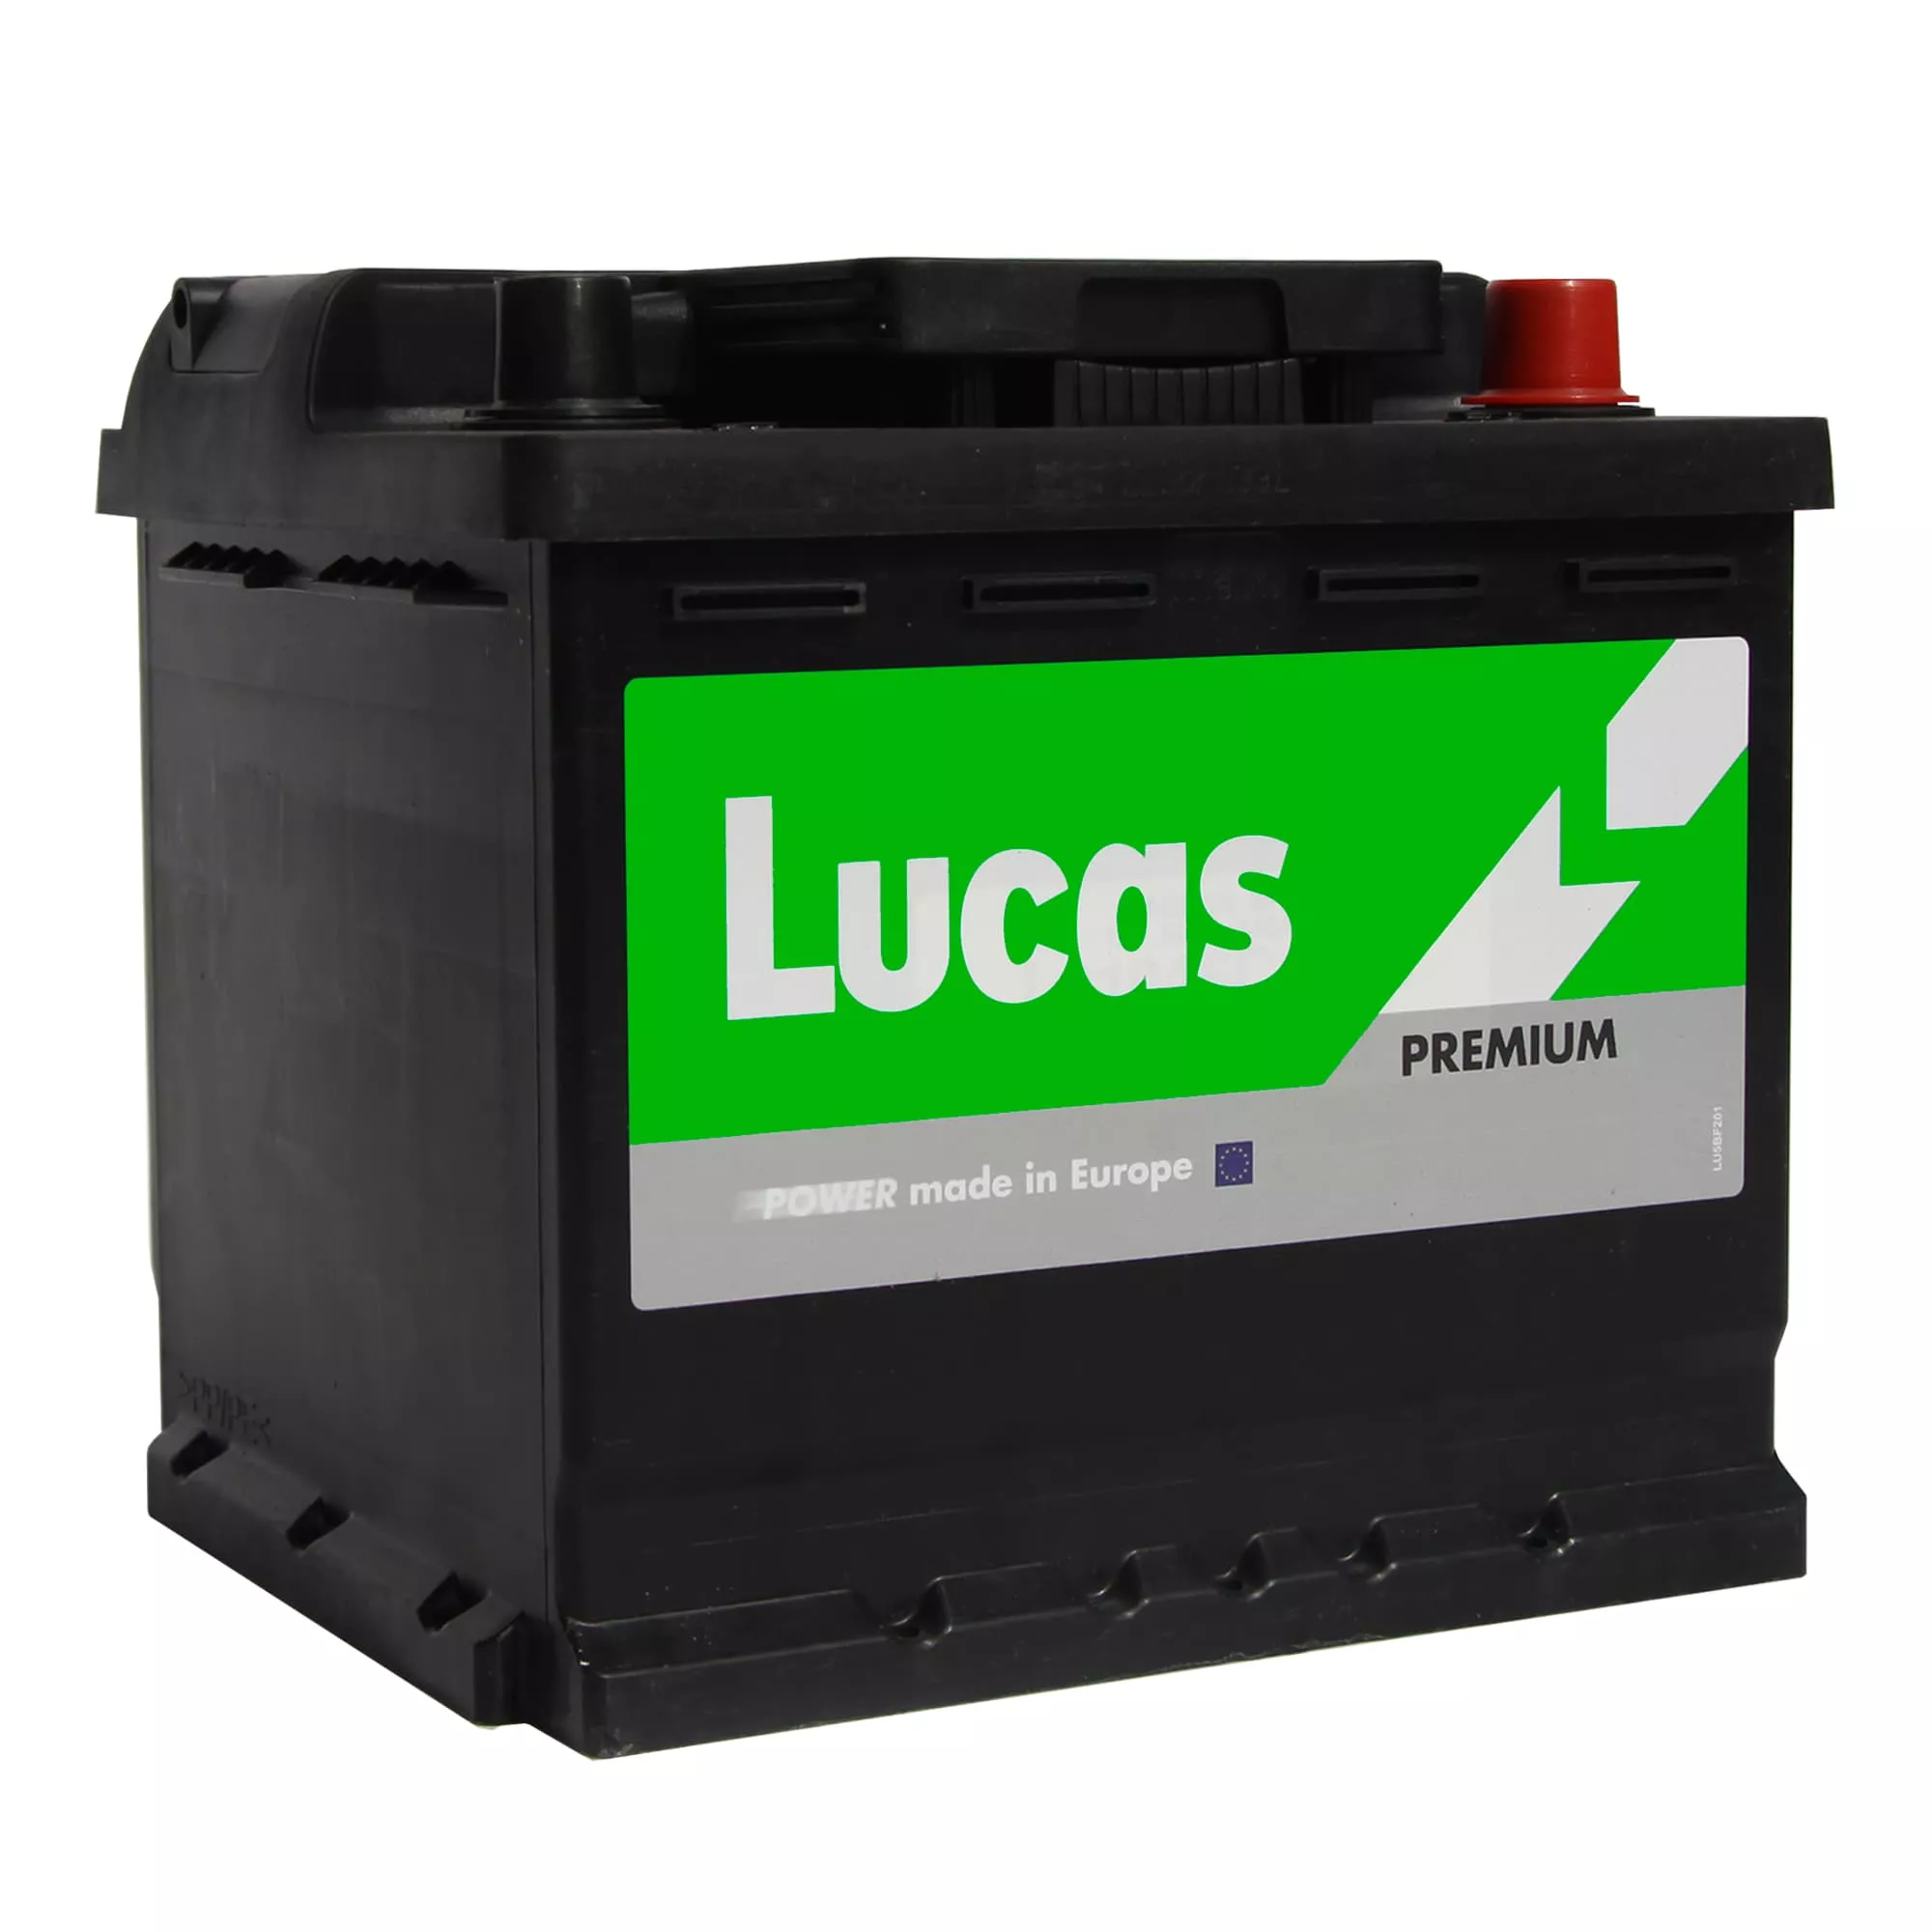 Аккумулятор Lucas (Batteries manufactured by Exide in Spain) 6CT-50 АзЕ (LBP011A)